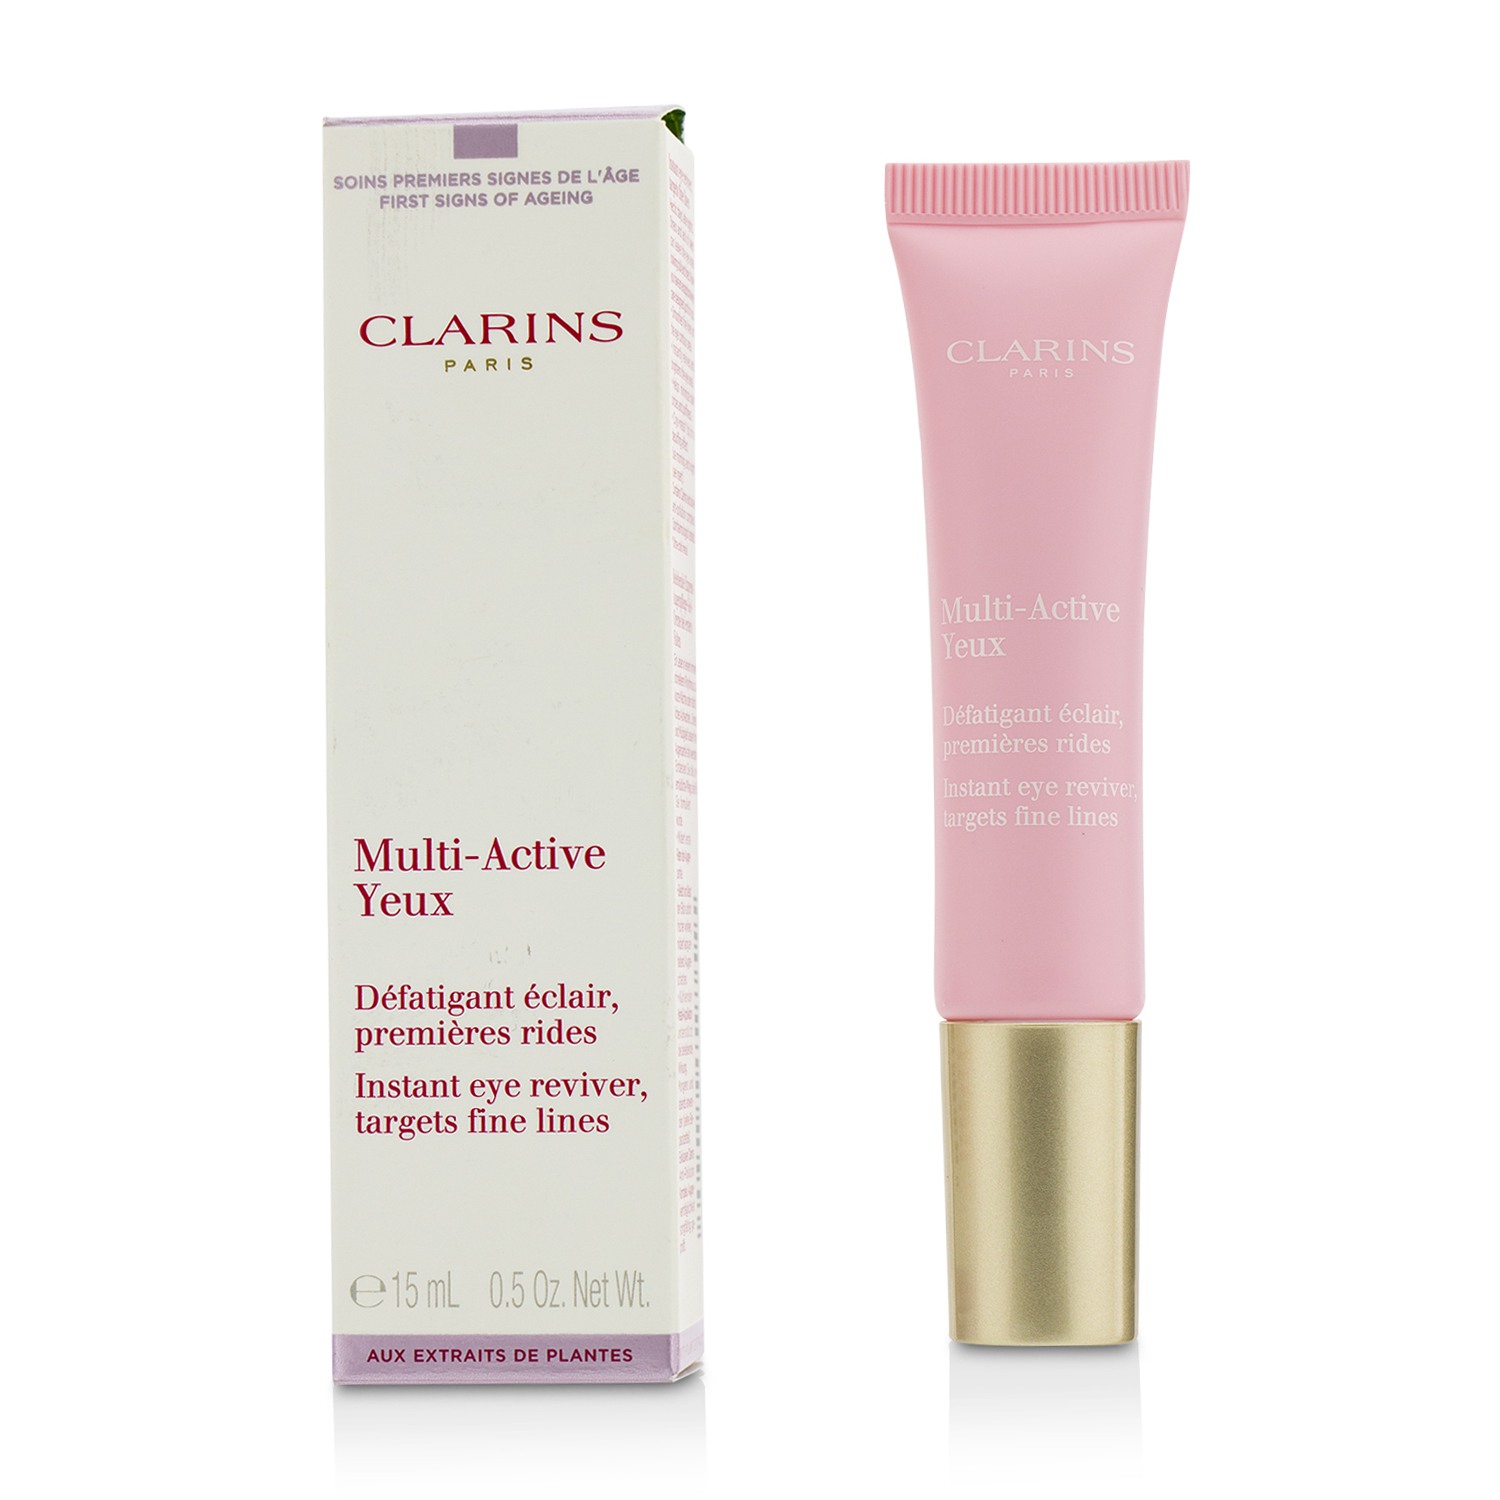 Multi-Active Yeux Clarins Image